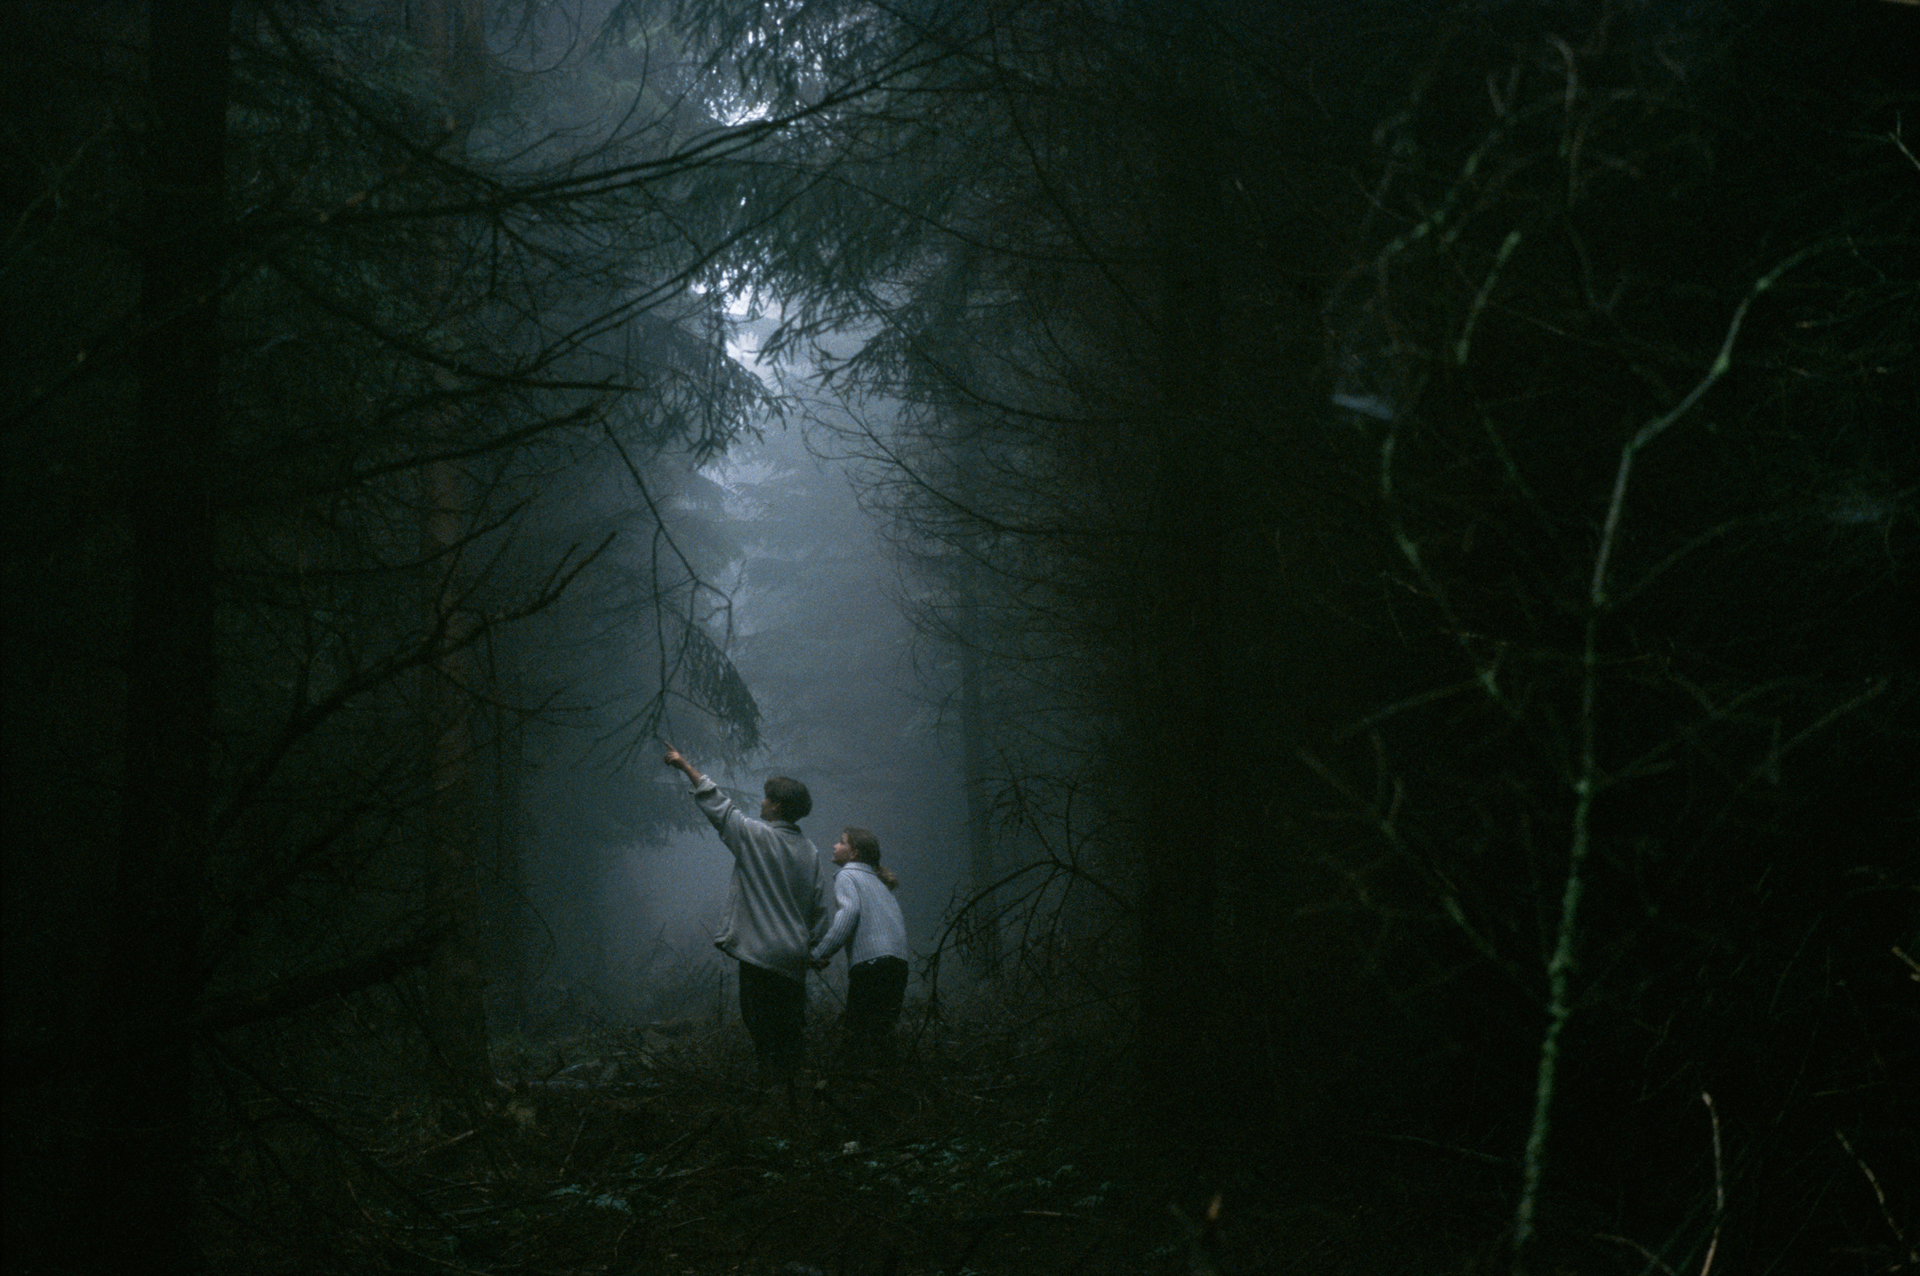  Two youngsters explore the dark forests during a field trip.  Hoher Meisner Mountains, Germany  